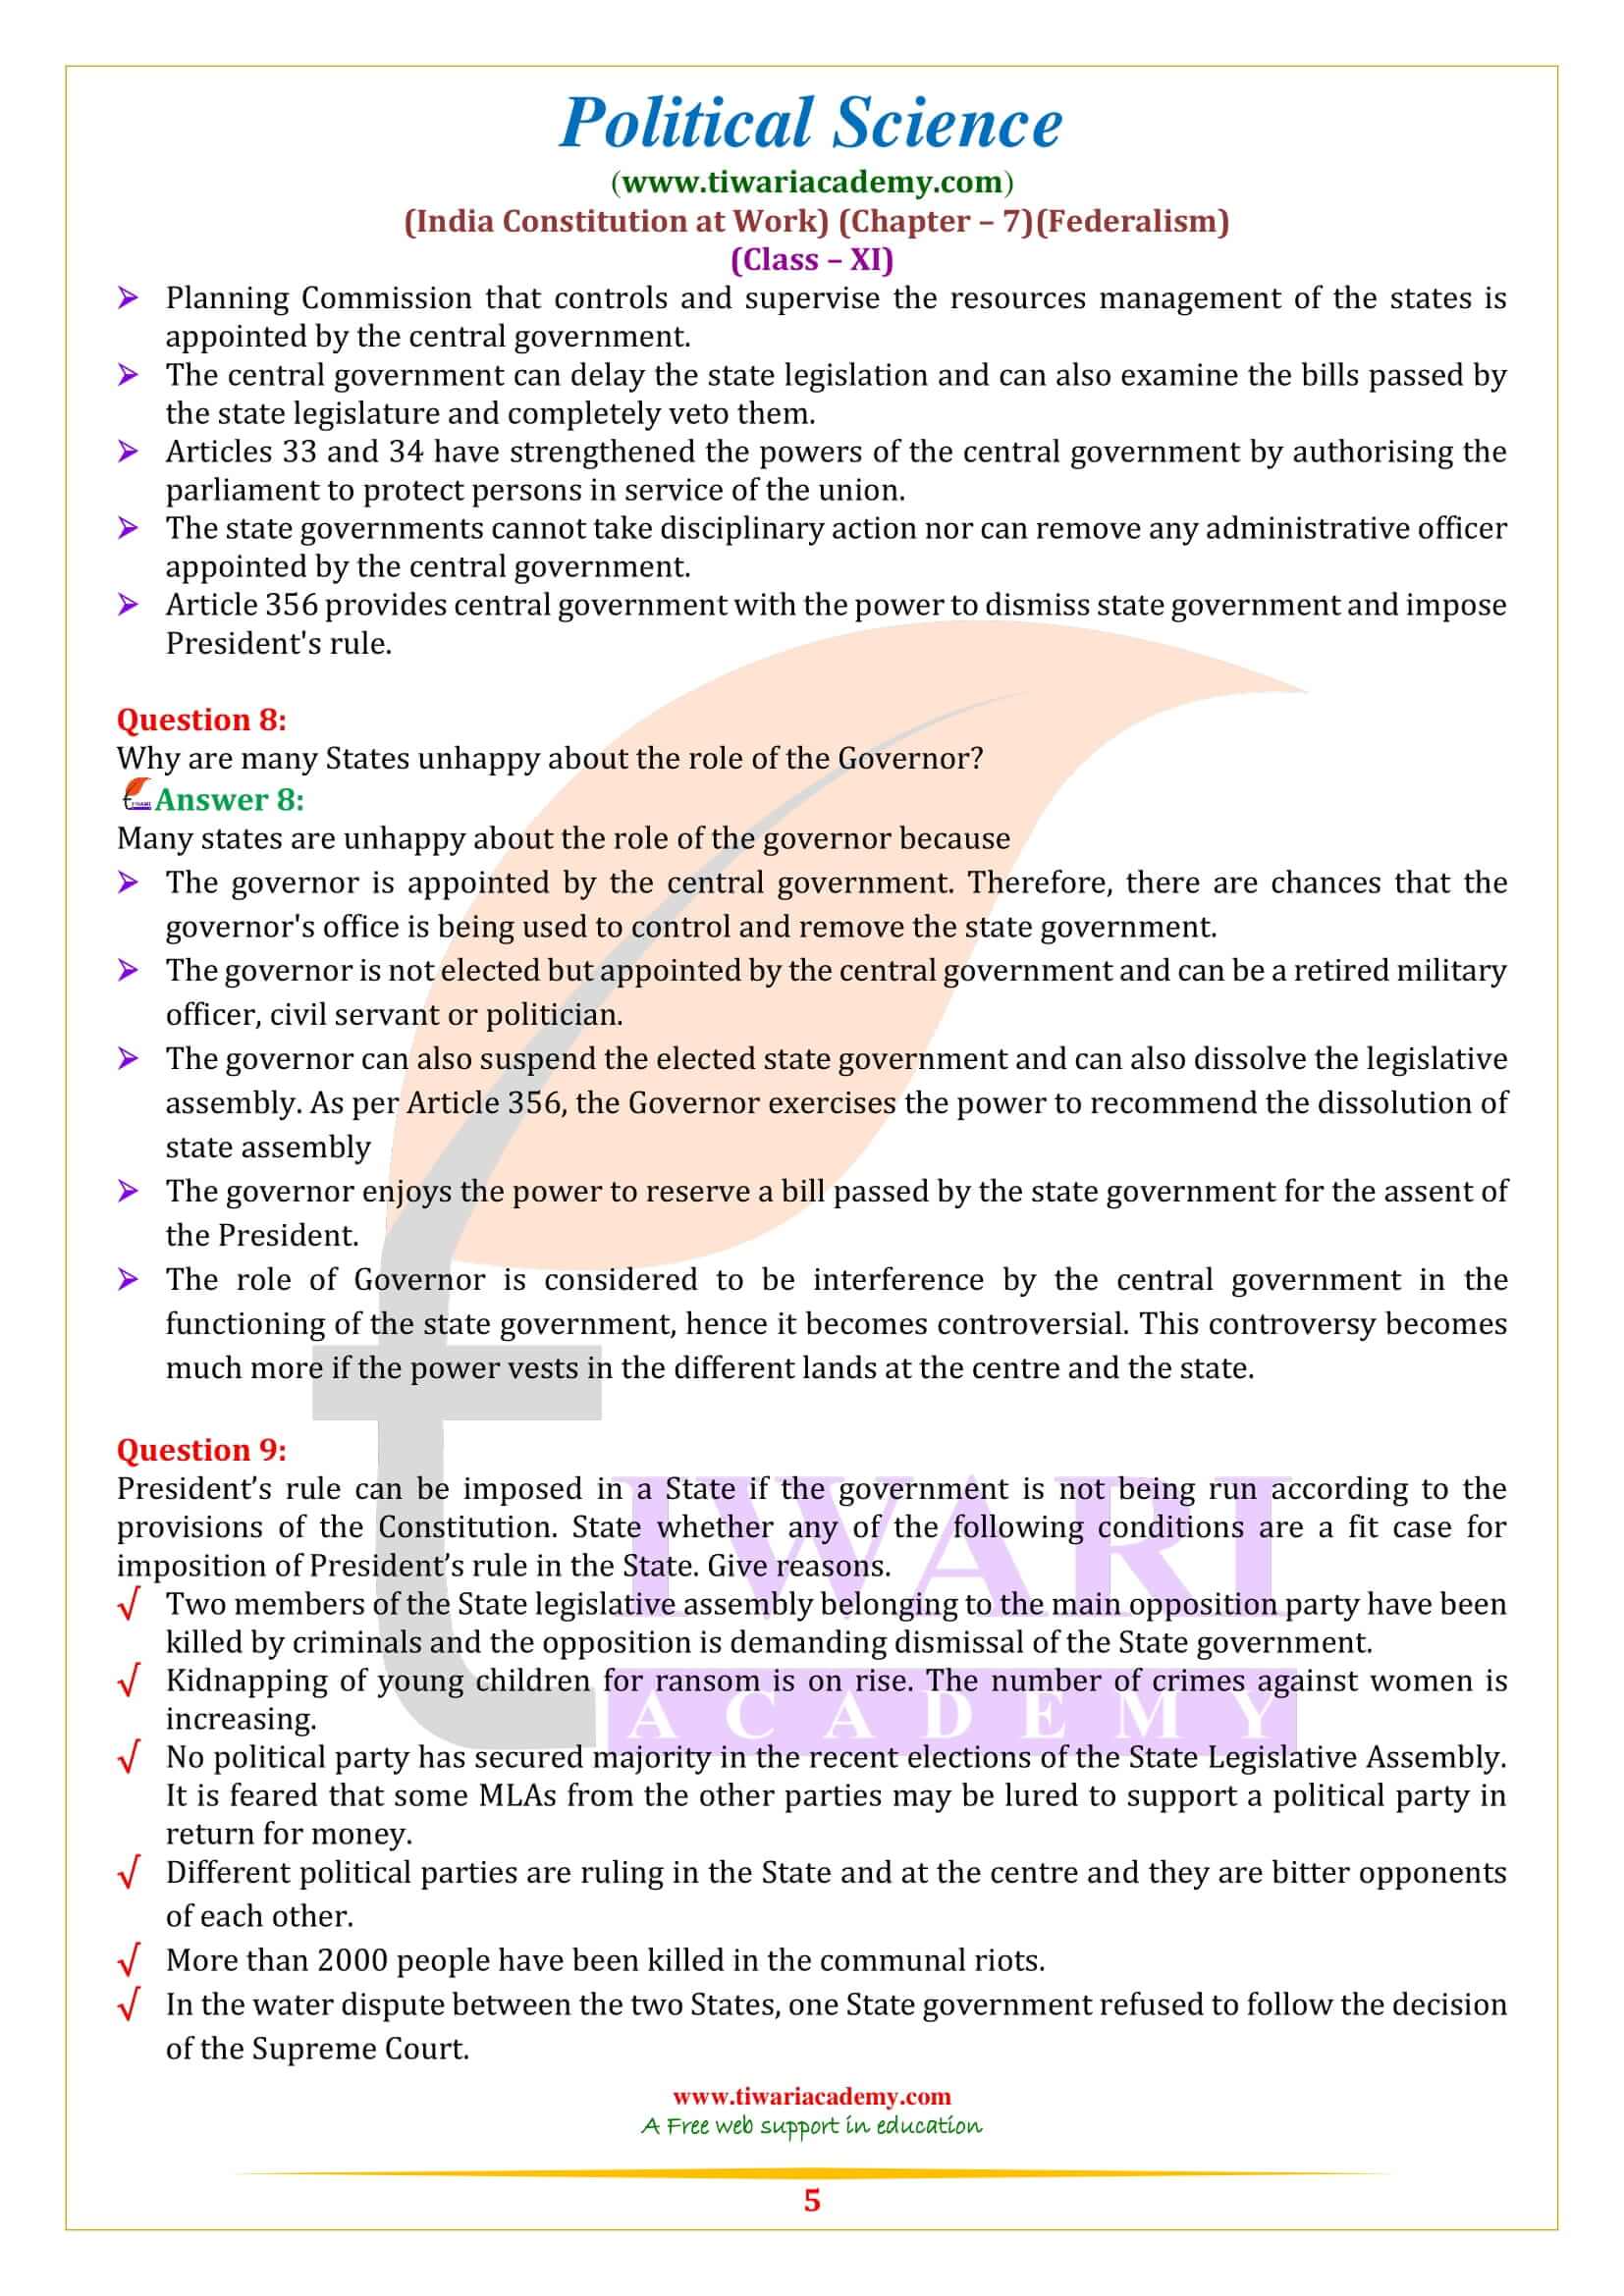 NCERT Solutions for Class 11 Political Science Chapter 7 updated for new session